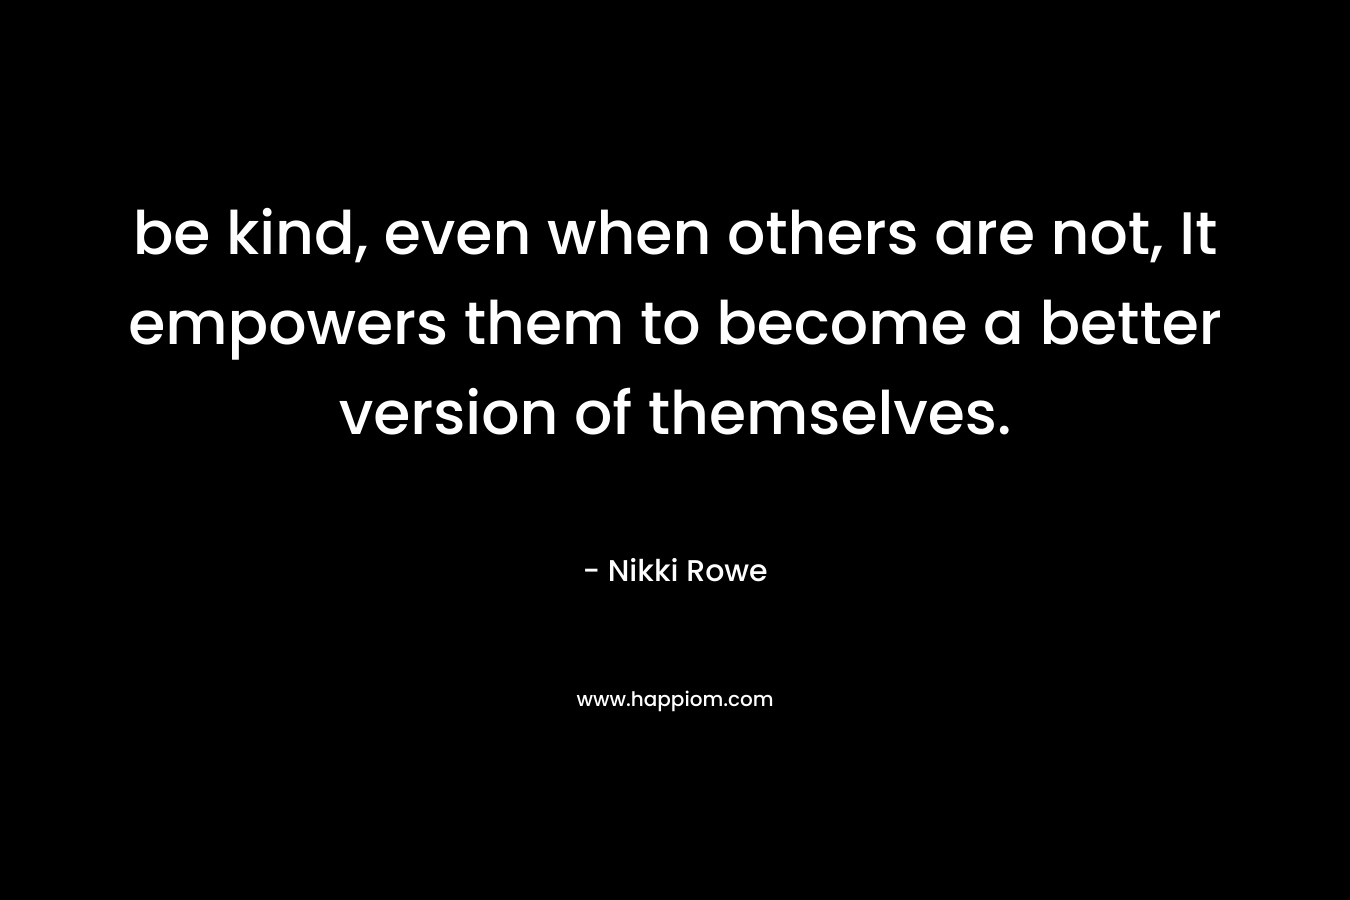 be kind, even when others are not, It empowers them to become a better version of themselves. – Nikki Rowe